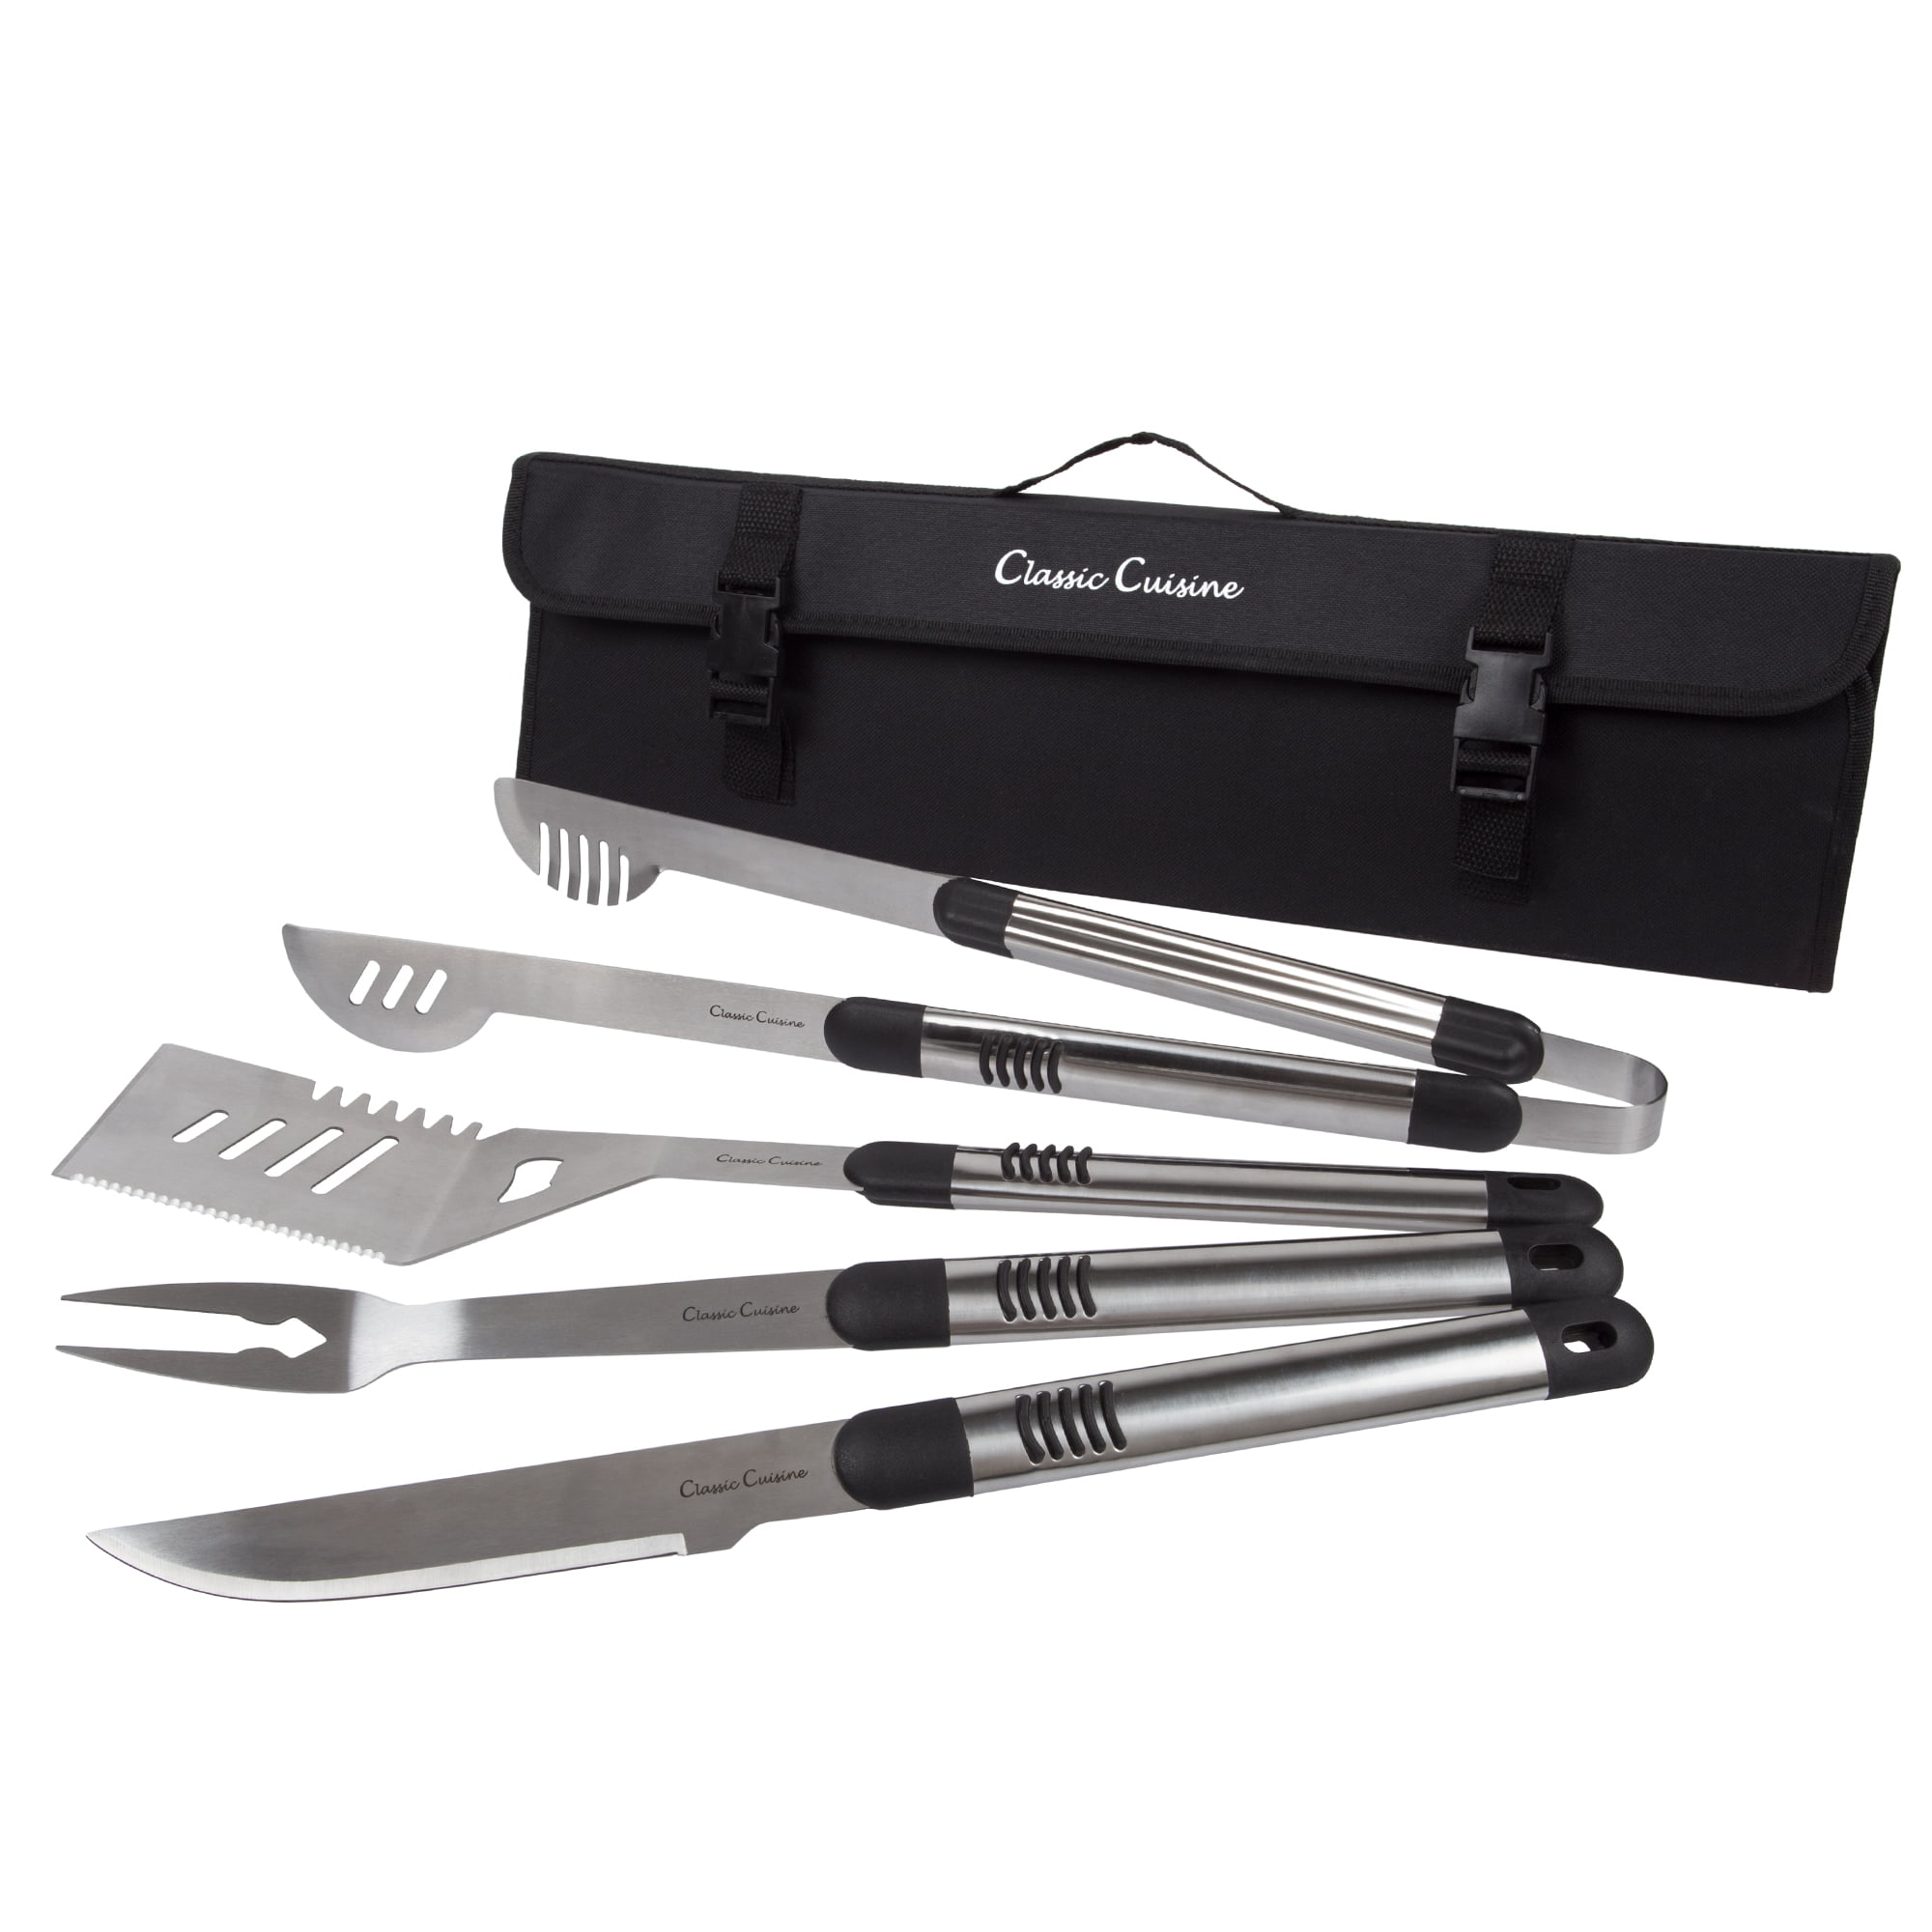 Details about   BBQ Grill Tool Set 9in1 Stainless Steel Barbecue Grilling Accessories with Case 